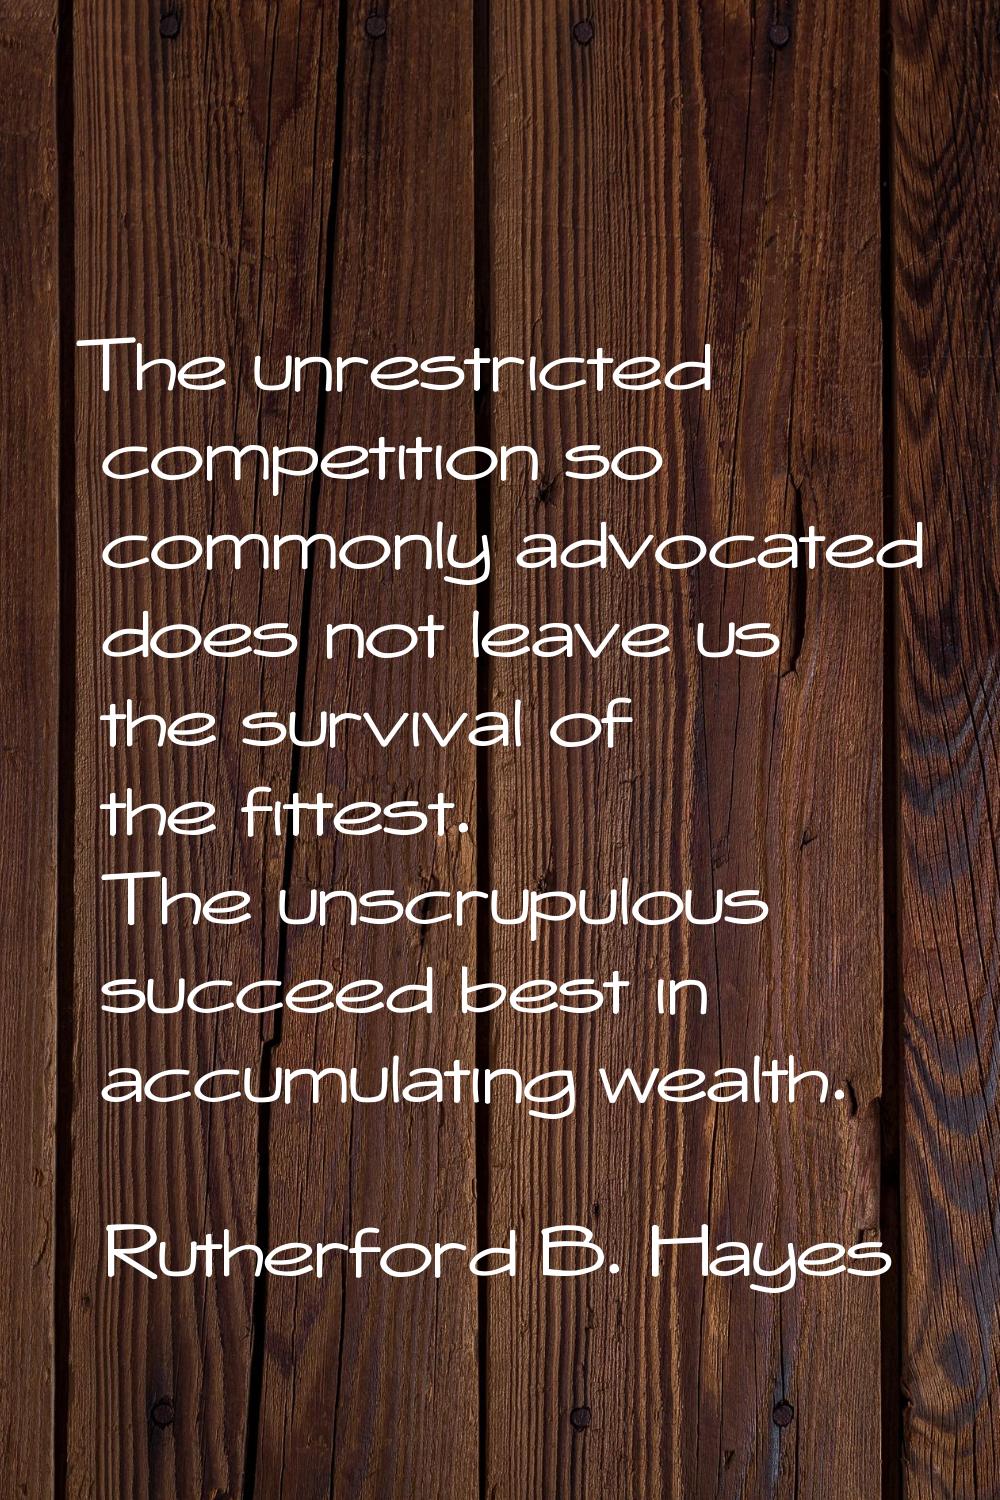 The unrestricted competition so commonly advocated does not leave us the survival of the fittest. T